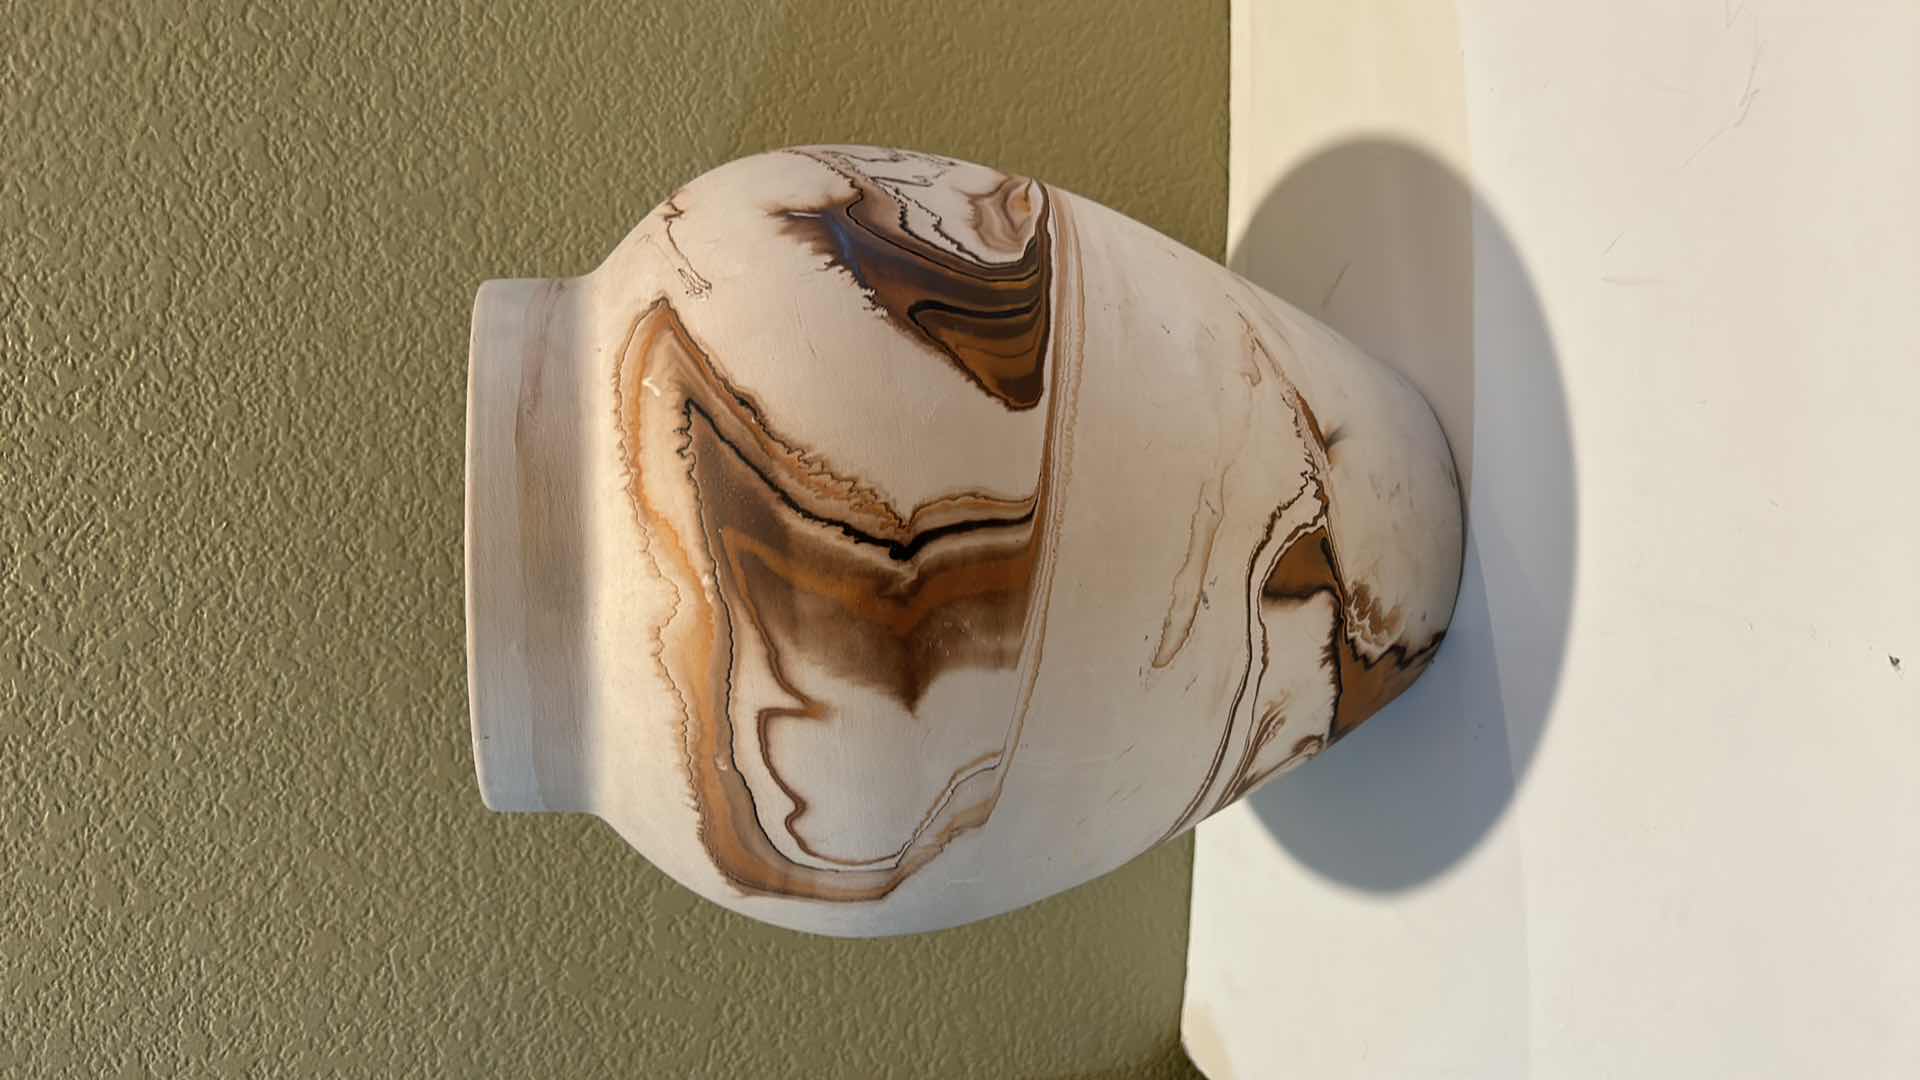 Photo 7 of NEMADJI EARTH POTTERY HAND MADE VASE- MADE FROM 25 THOUSAND YEAR OLD RETREATING GLACIERS